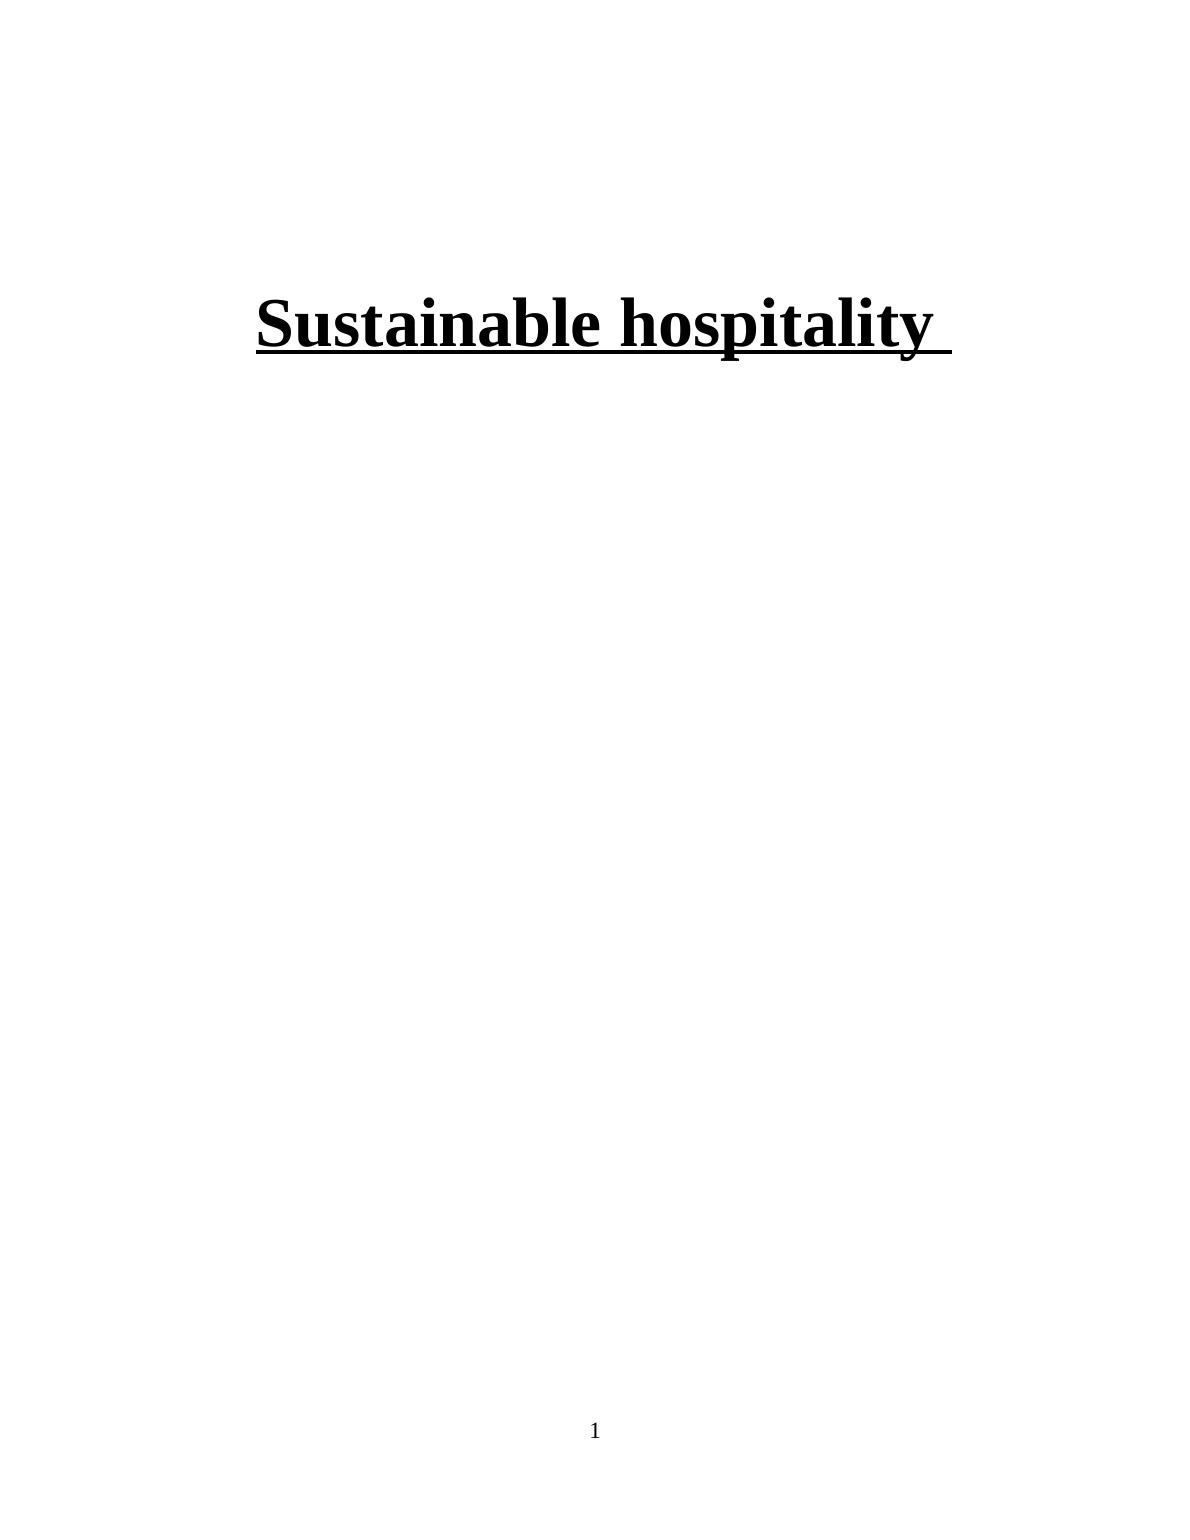 Sustainable Hospitality: Issues, Impact, and Management_1